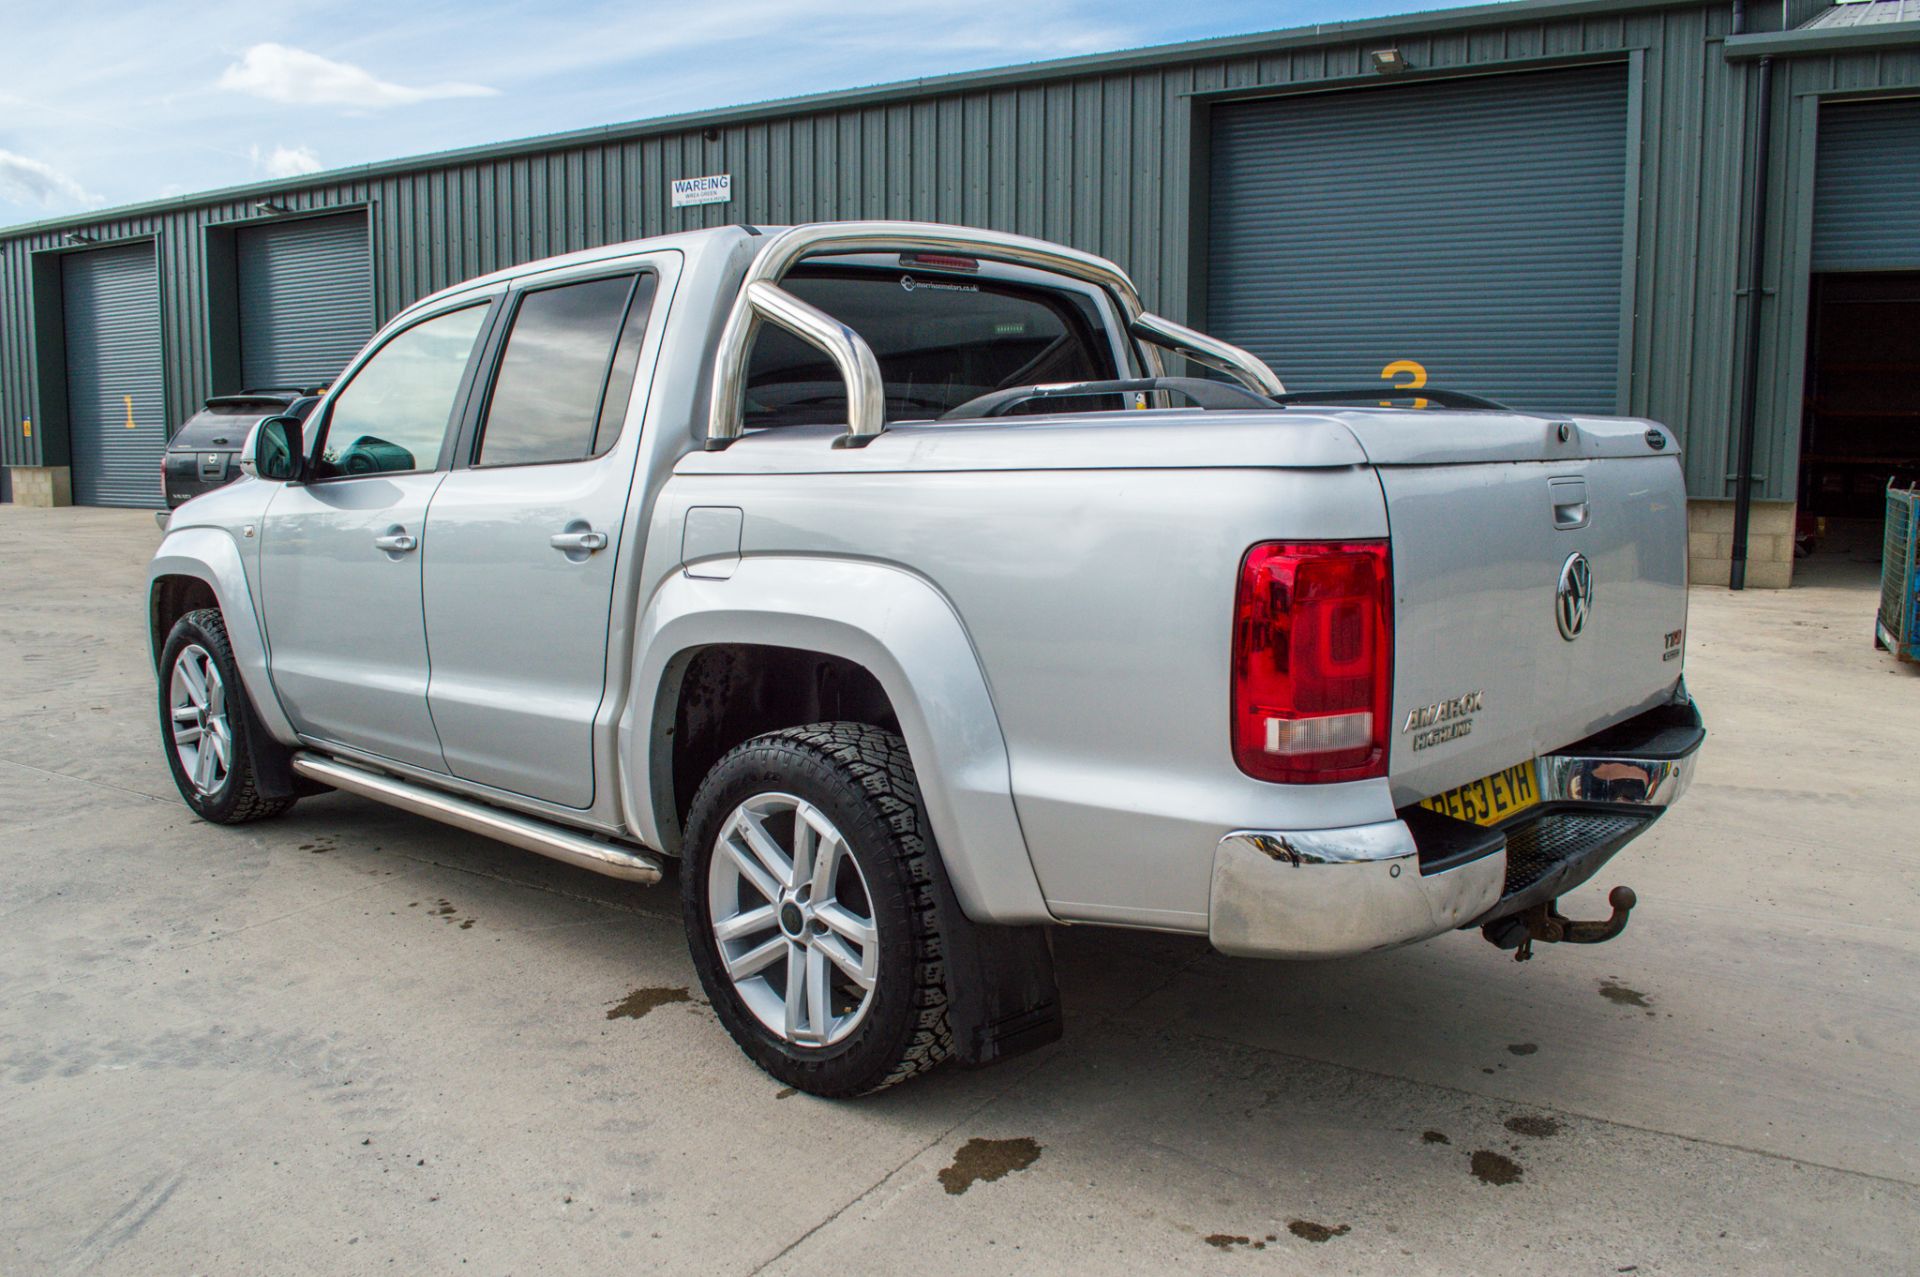 Volkswagen Amarok 2.0 TDI highline 4wd automatic double cab pick up Reg No: PE63 EYH Date of - Image 4 of 30